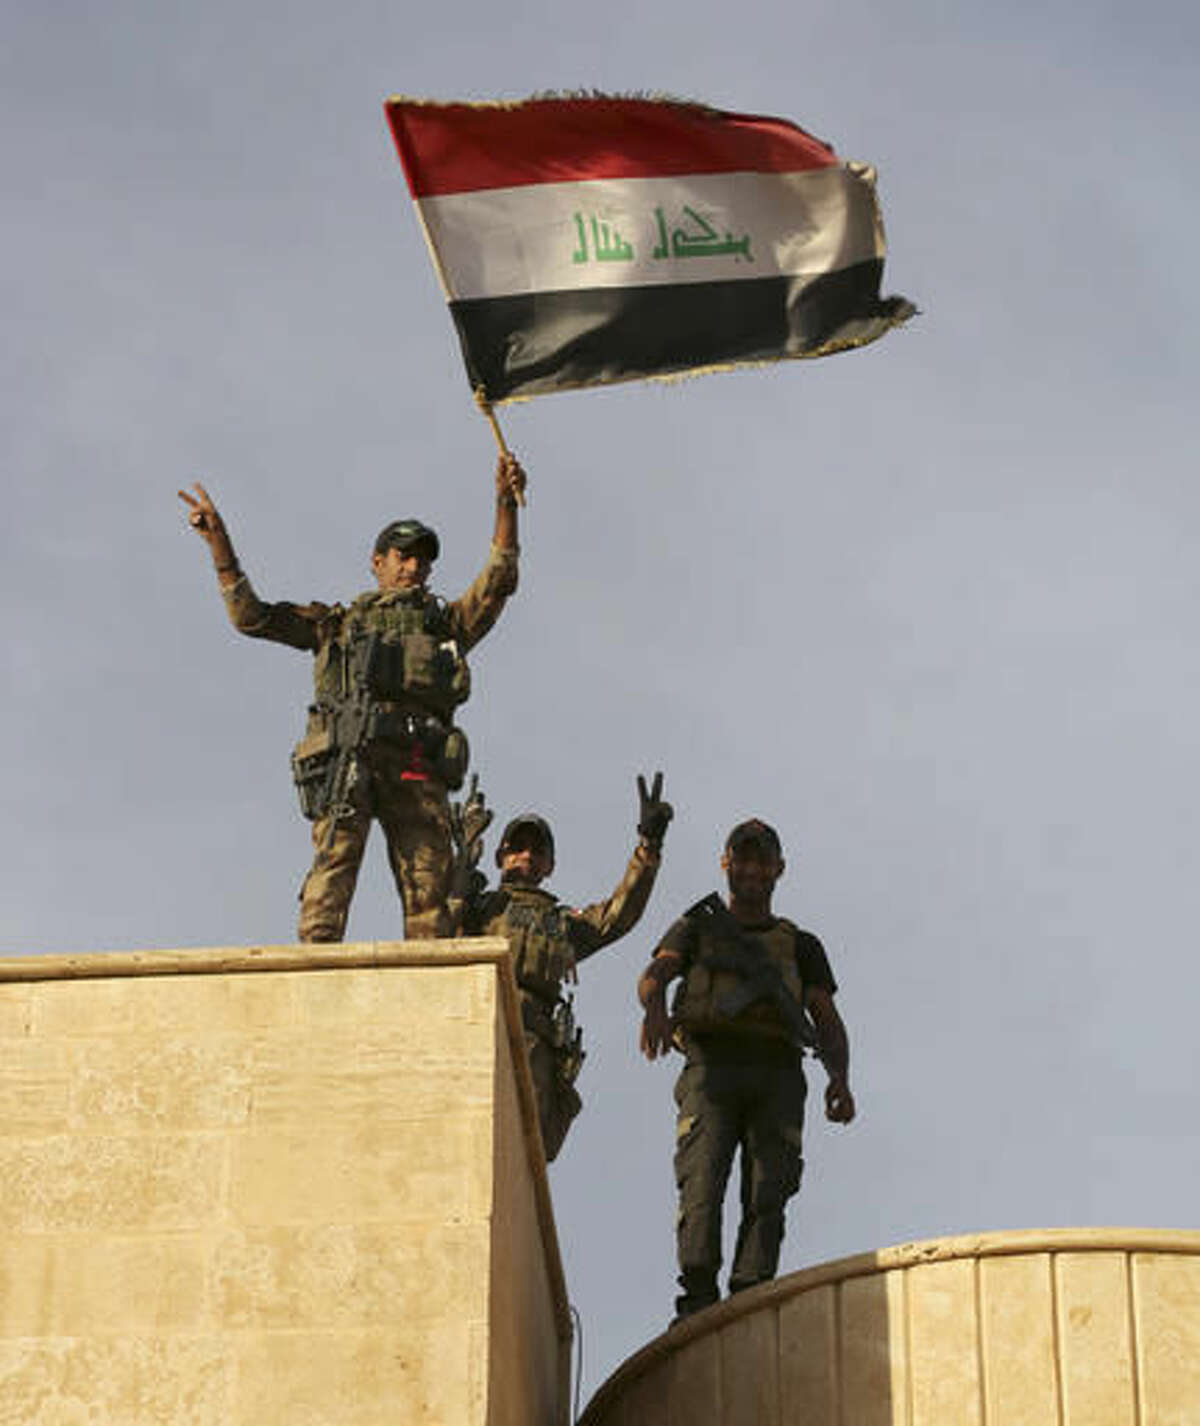 Iraq's elite counterterrorism forces raise an Iraqi flag after retaking Bartella, outside Mosul, Iraq, Friday, Oct. 21, 2016. Iraqi and Kurdish forces backed by a U.S.-led coalition launched a multi-pronged assault this week to retake Mosul and surrounding areas from IS. The operation is the largest undertaken by the Iraqi military since the 2003 U.S.-led invasion. Iraqi officials said they had advanced as far as the town of Bartella, 15 kilometers (nine miles) from Mosul's outskirts, by Thursday. (AP Photo/ Khalid Mohammed)